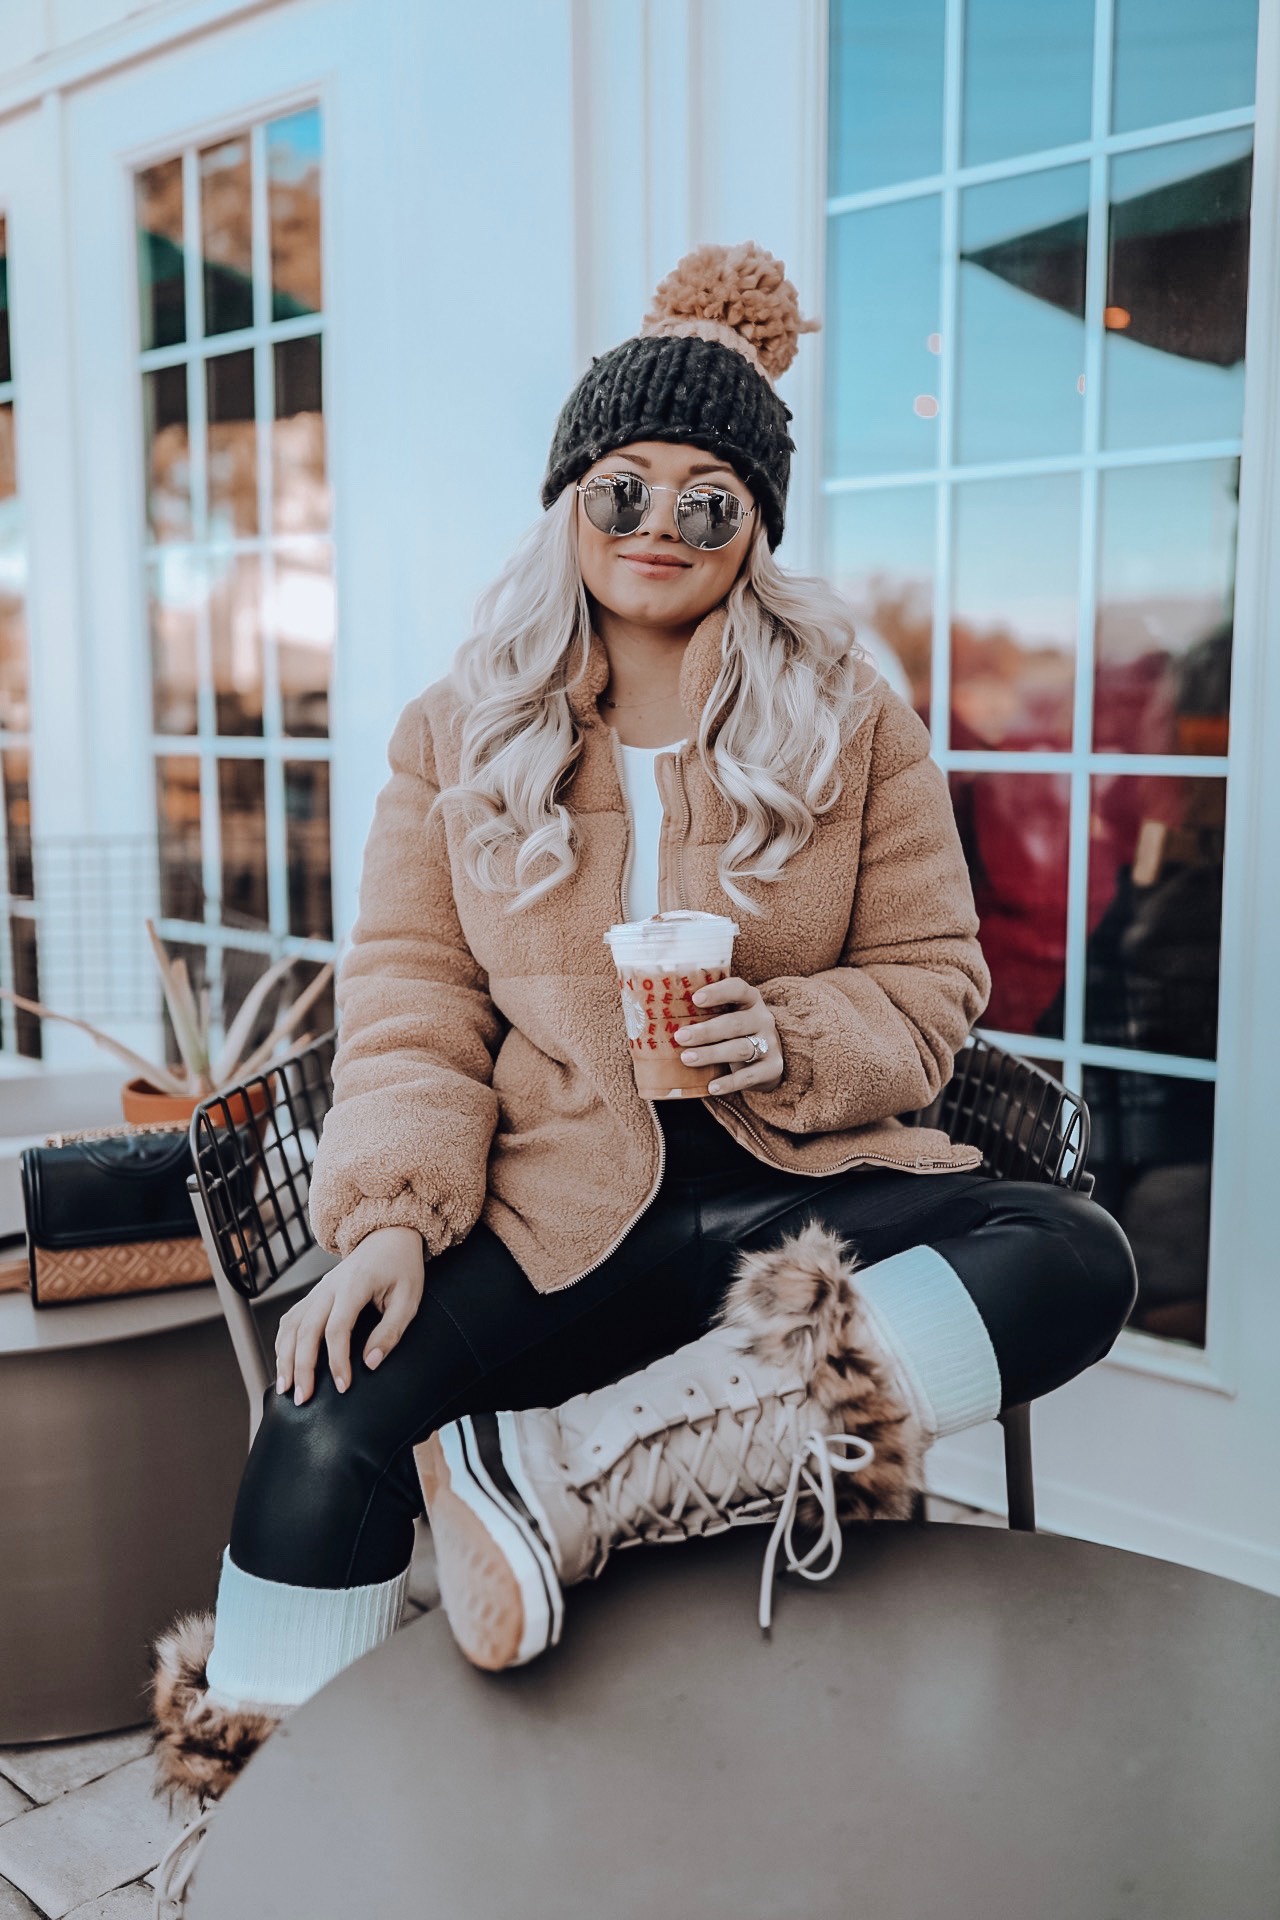 My Must-Have Pieces for Cute Snow Outfits